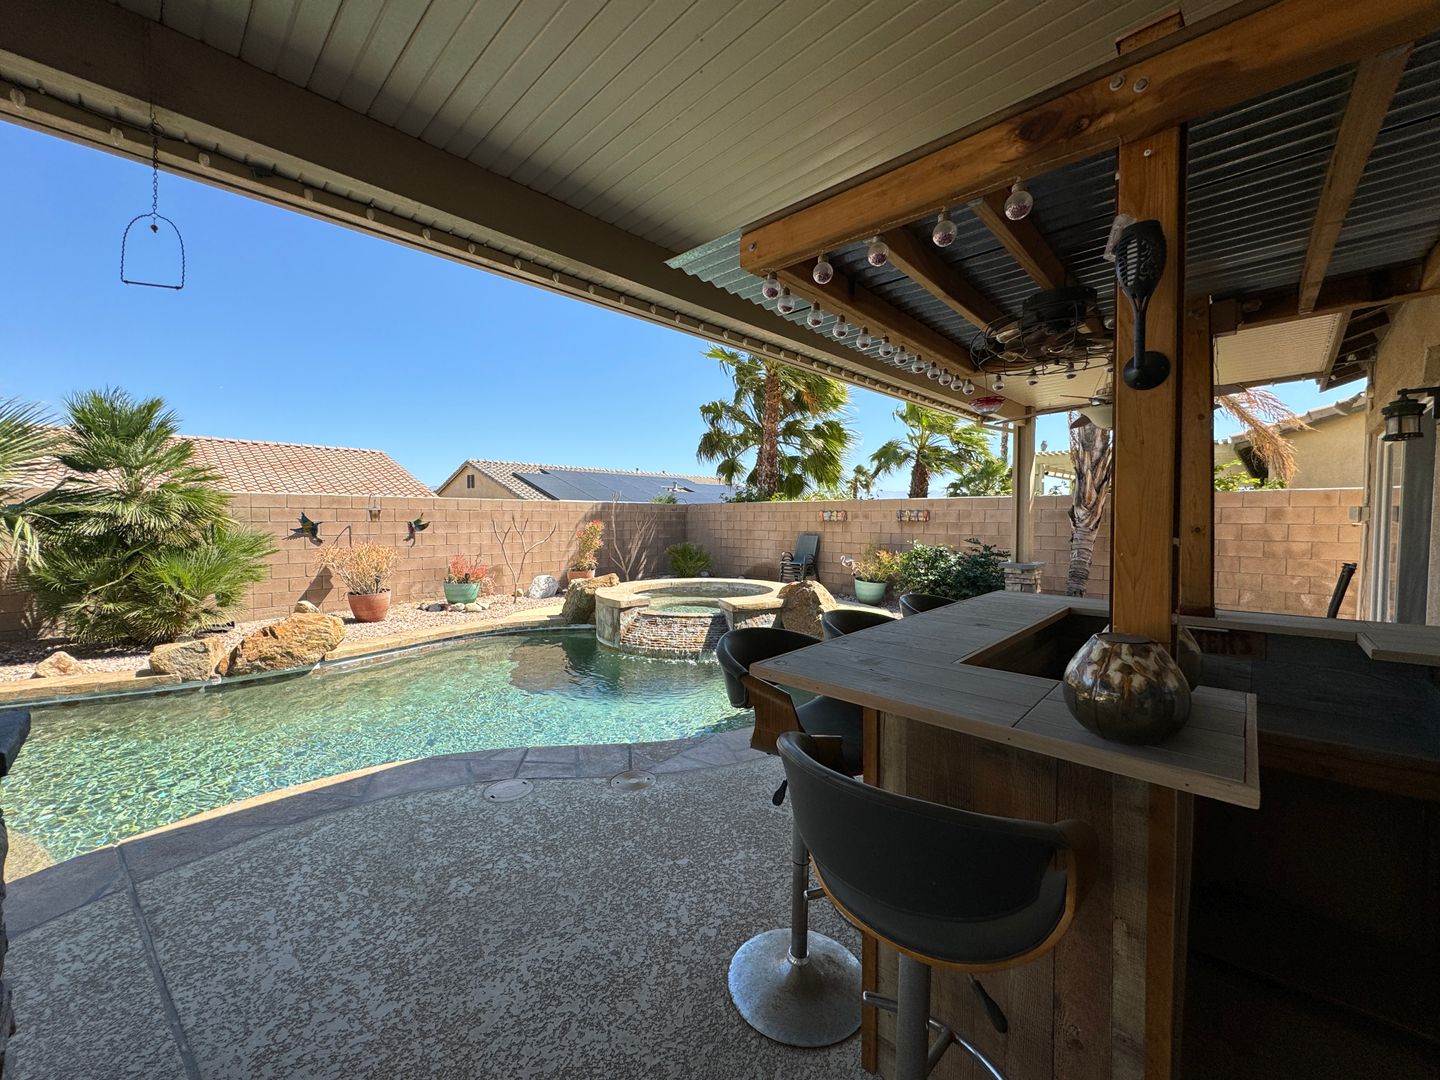 AVAILABLE NOW!! 3 Bed/2 Bath + 1 Bedroom/1 Bath CASITA in PALM SPRINGS!!